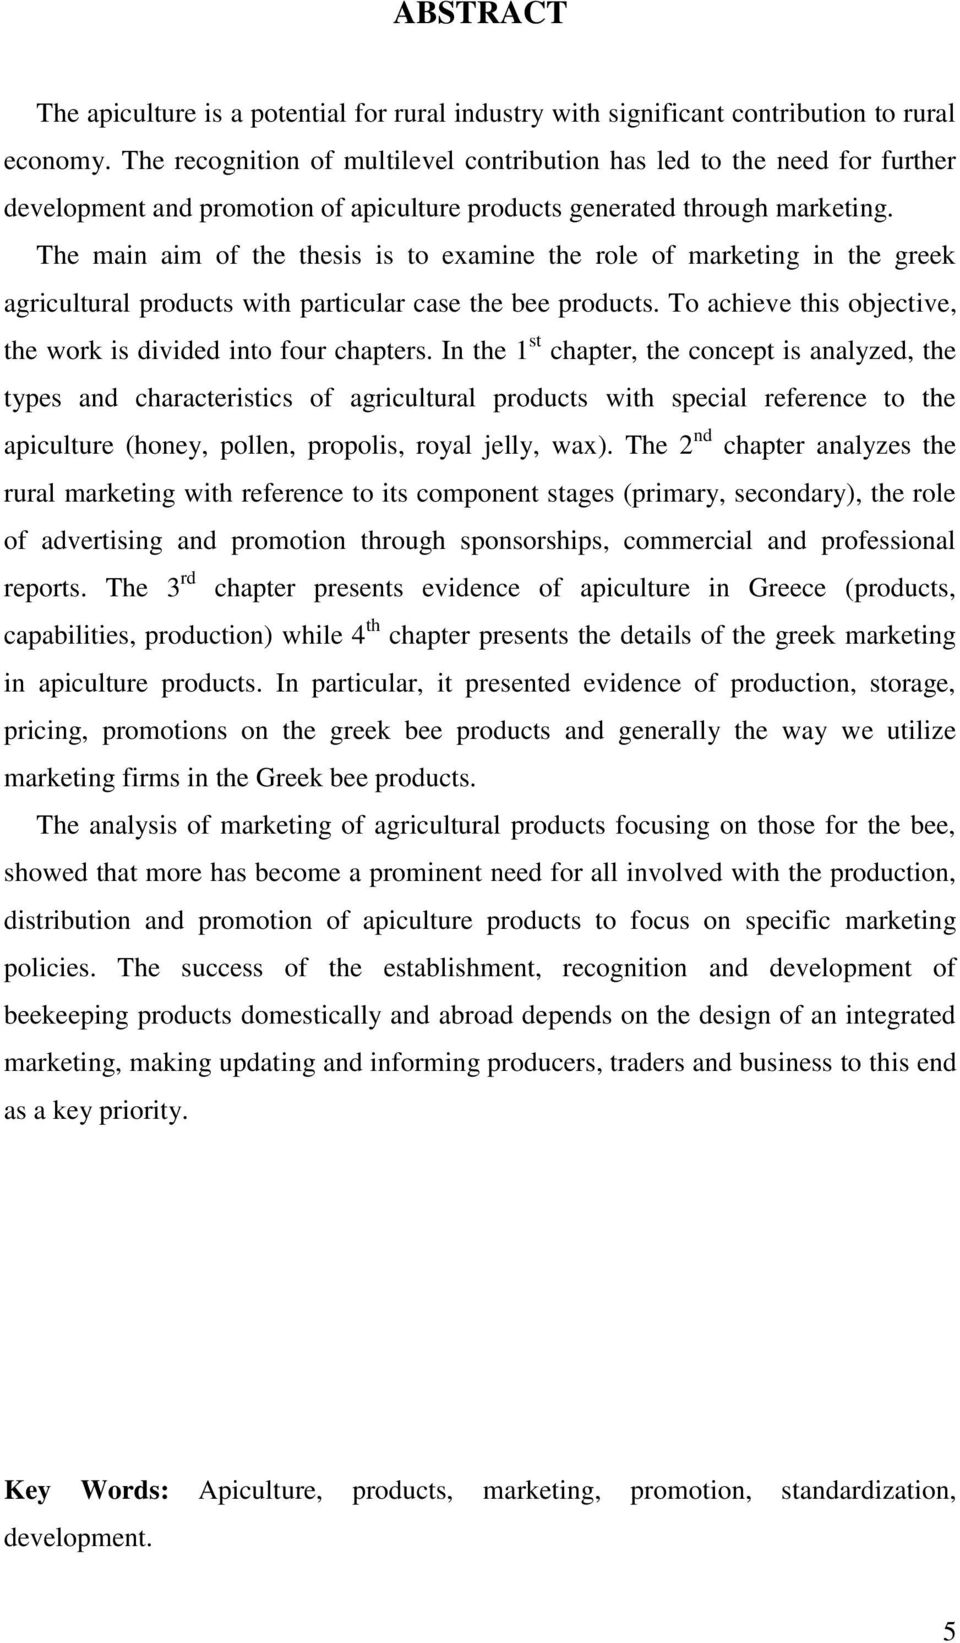 The main aim of the thesis is to examine the role of marketing in the greek agricultural products with particular case the bee products.